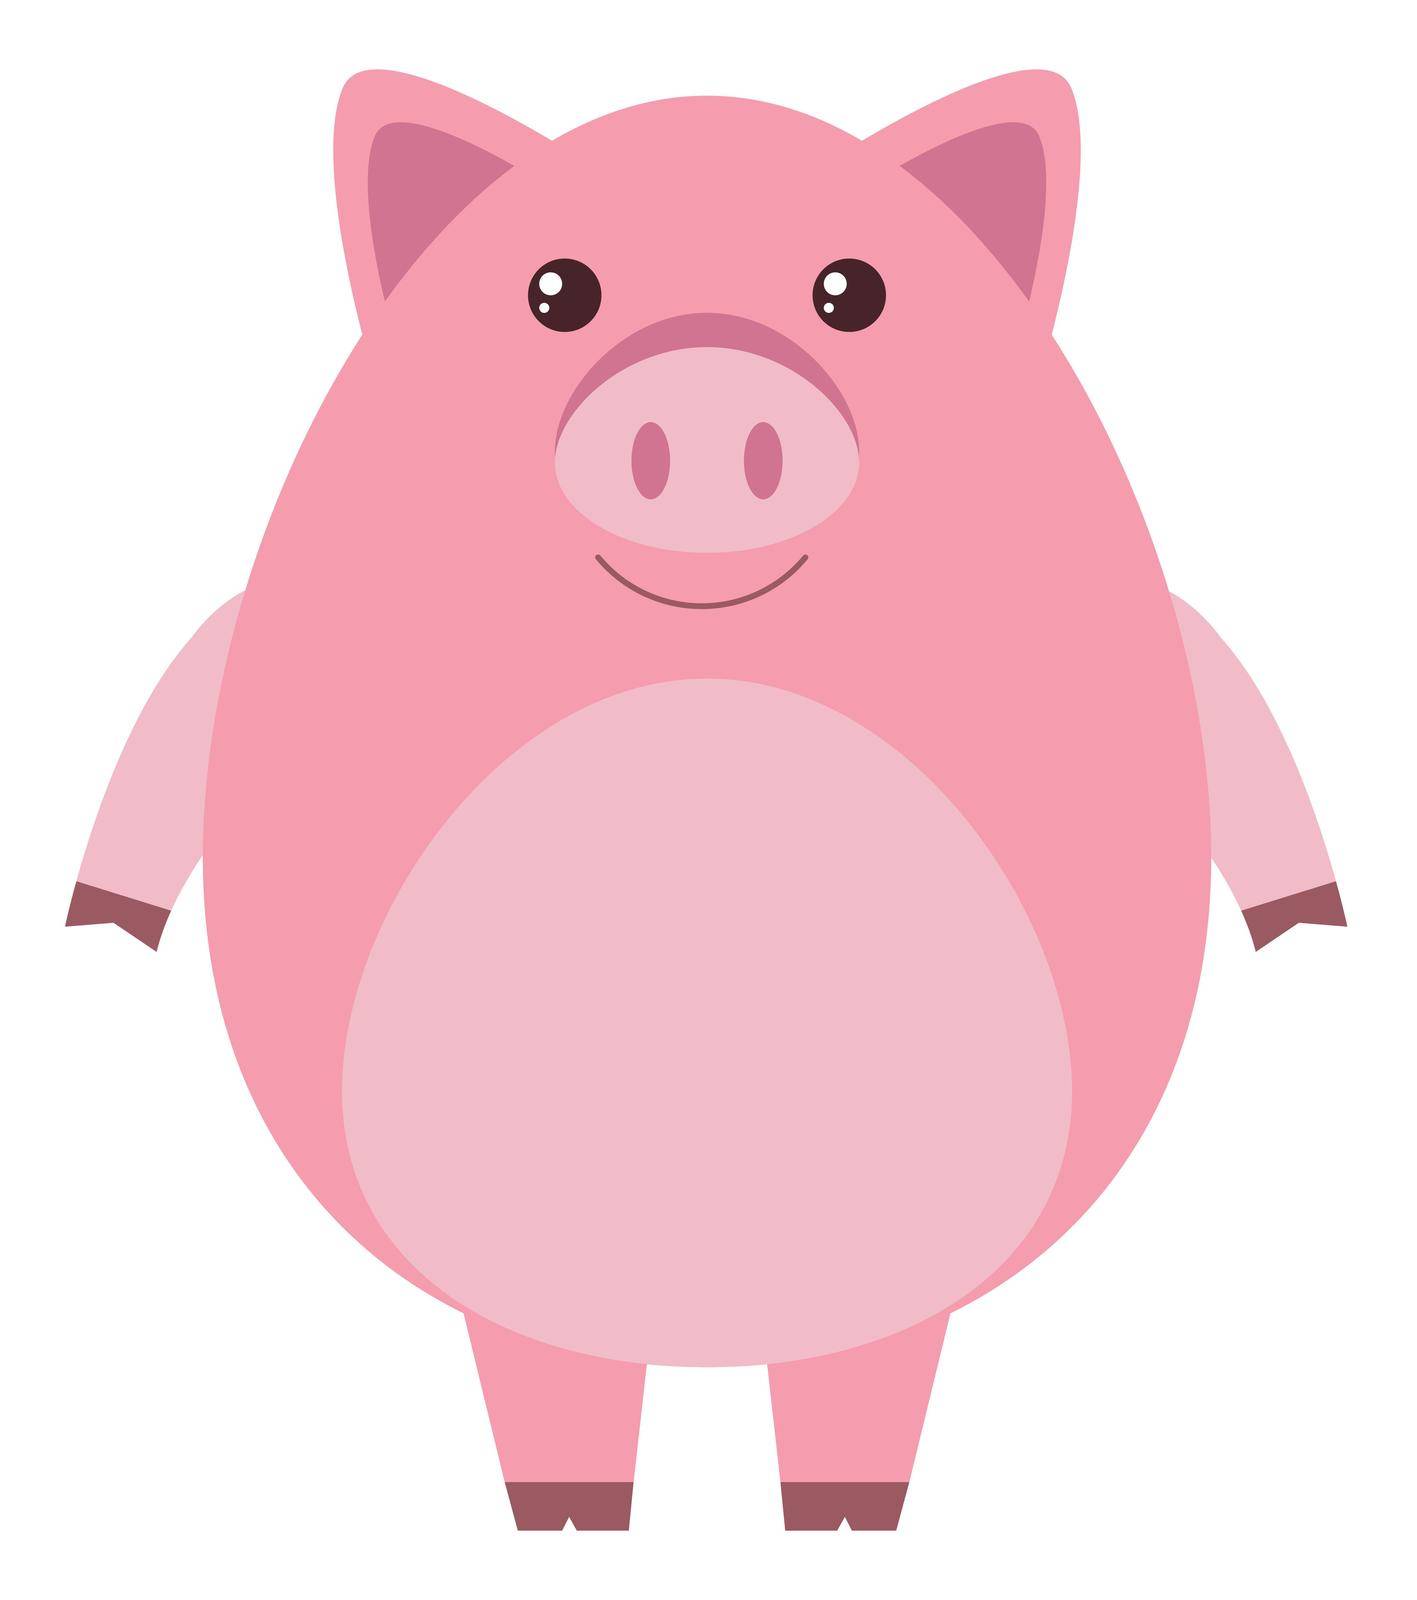 Pink pig with round body illustration